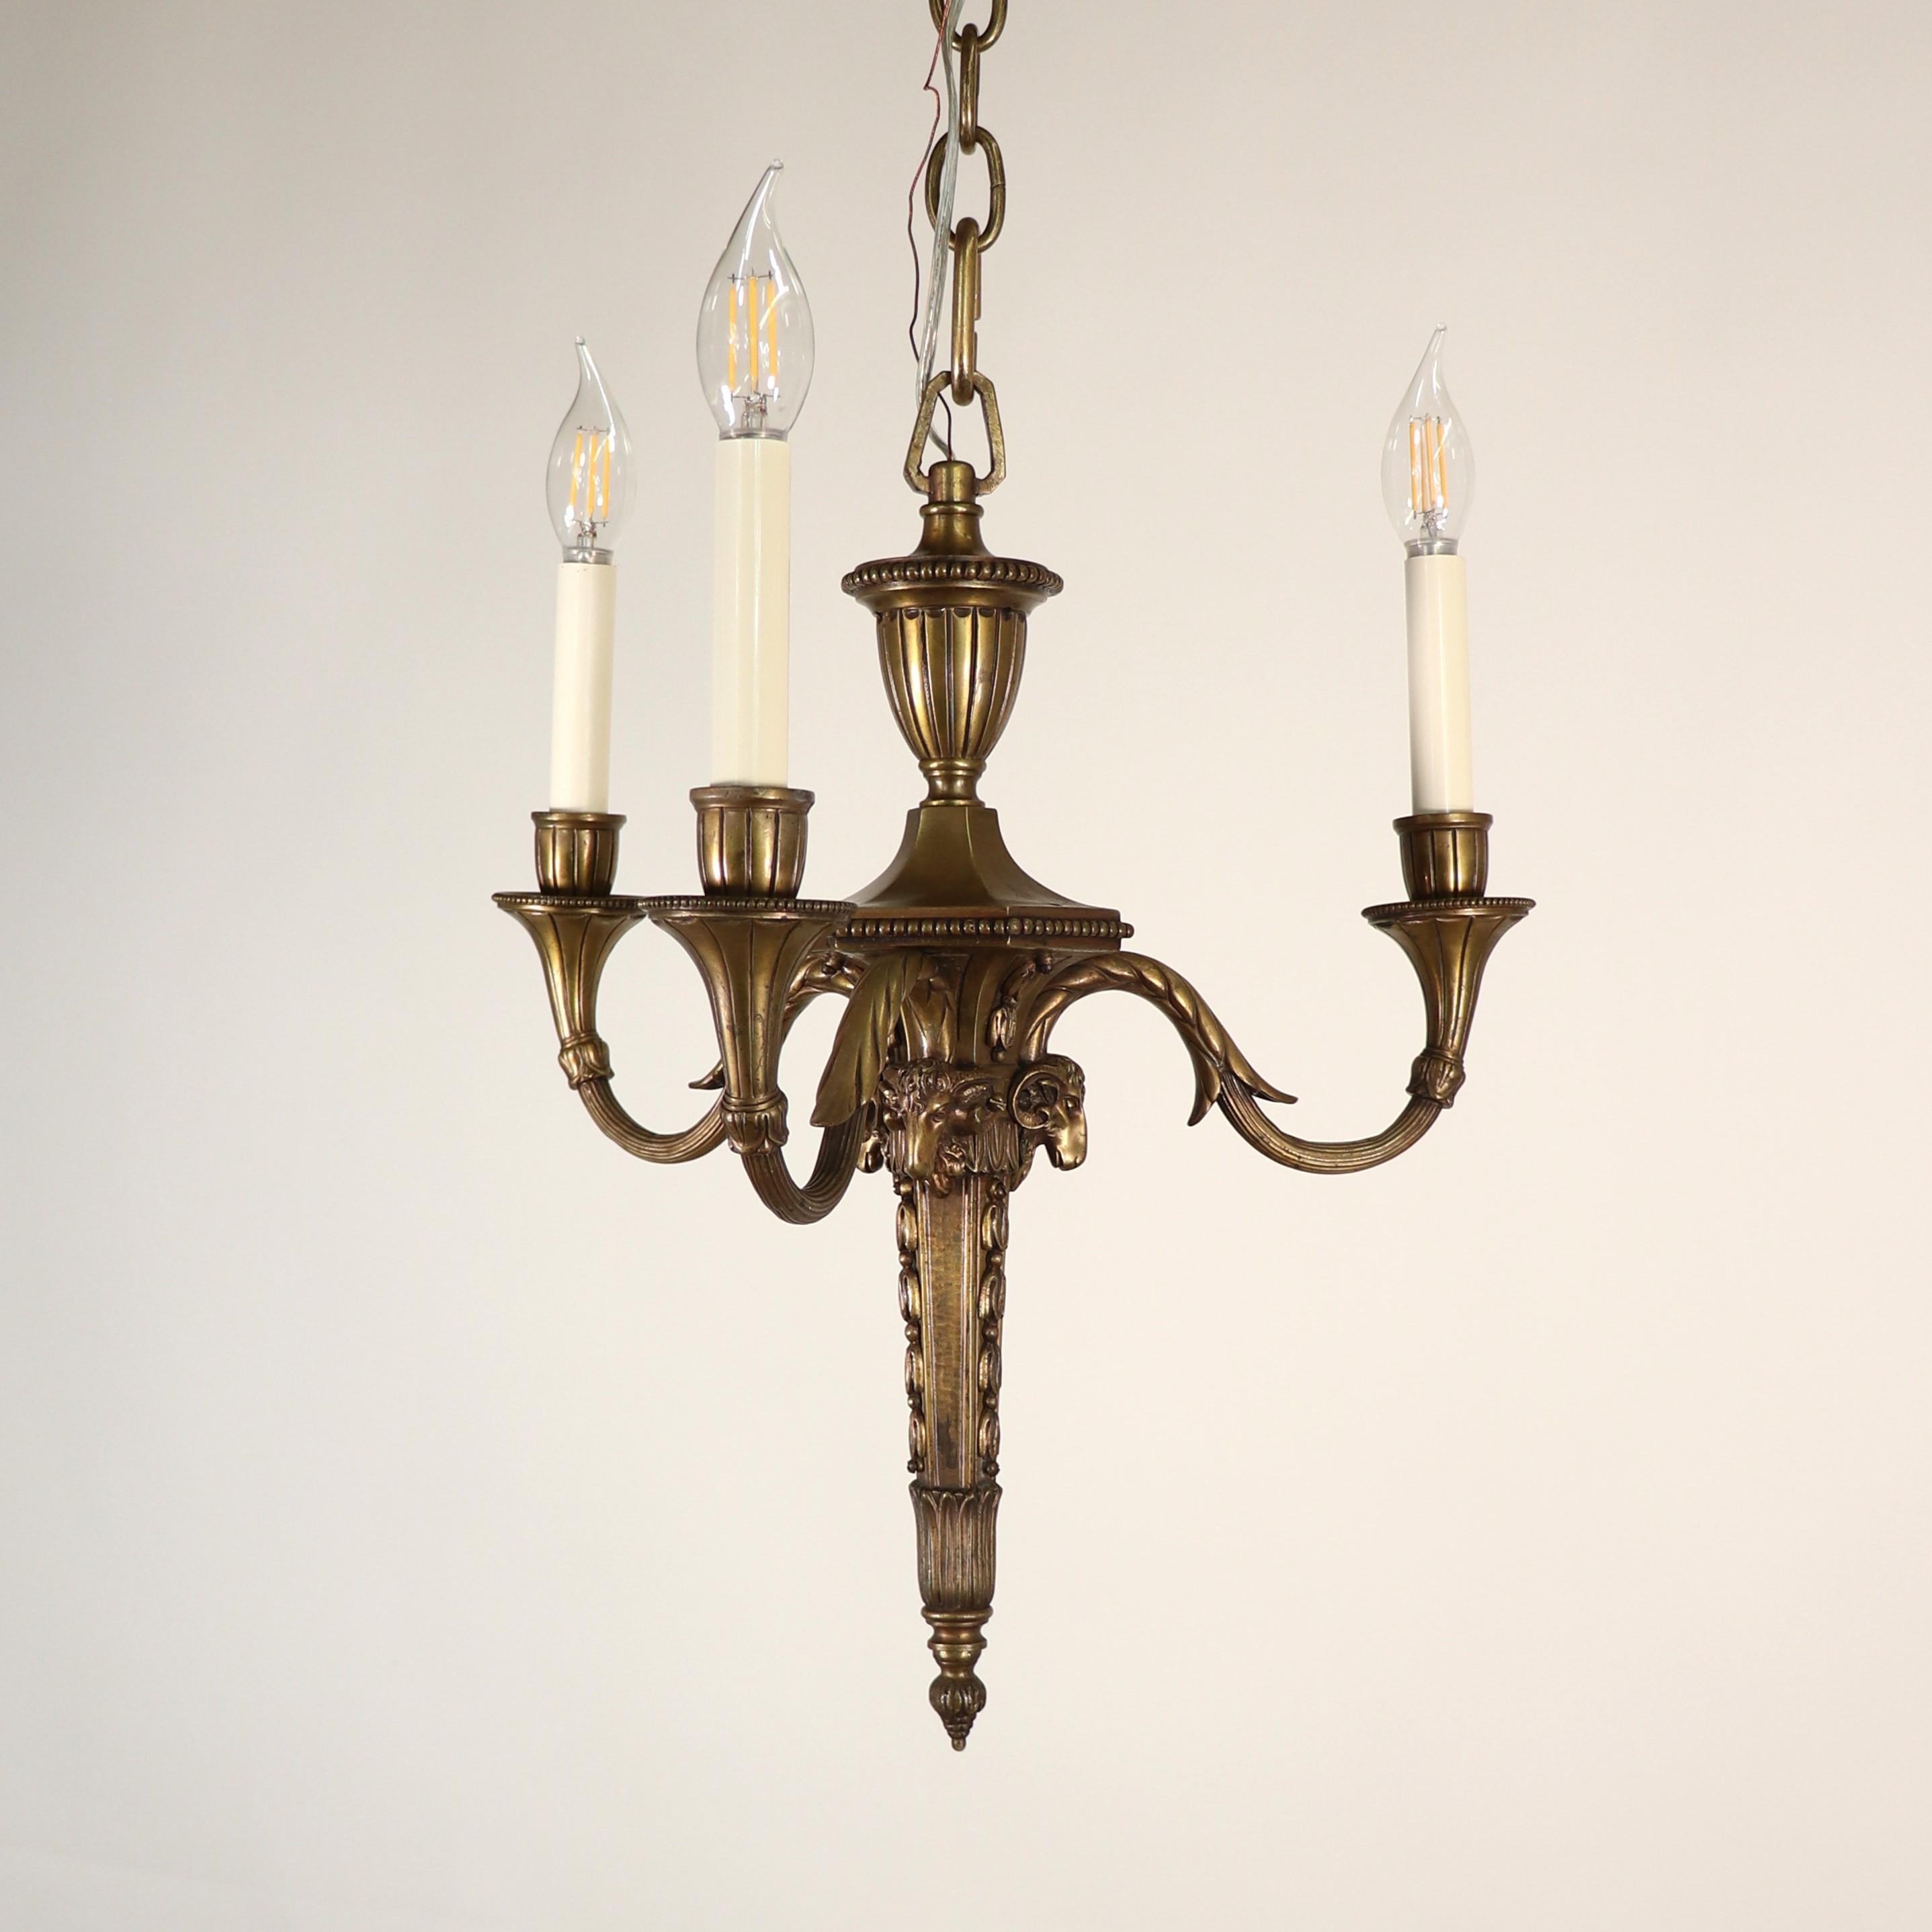 19th Century French Louis XVI Style Neoclassical Bronze Flambeau Chandelier For Sale 1